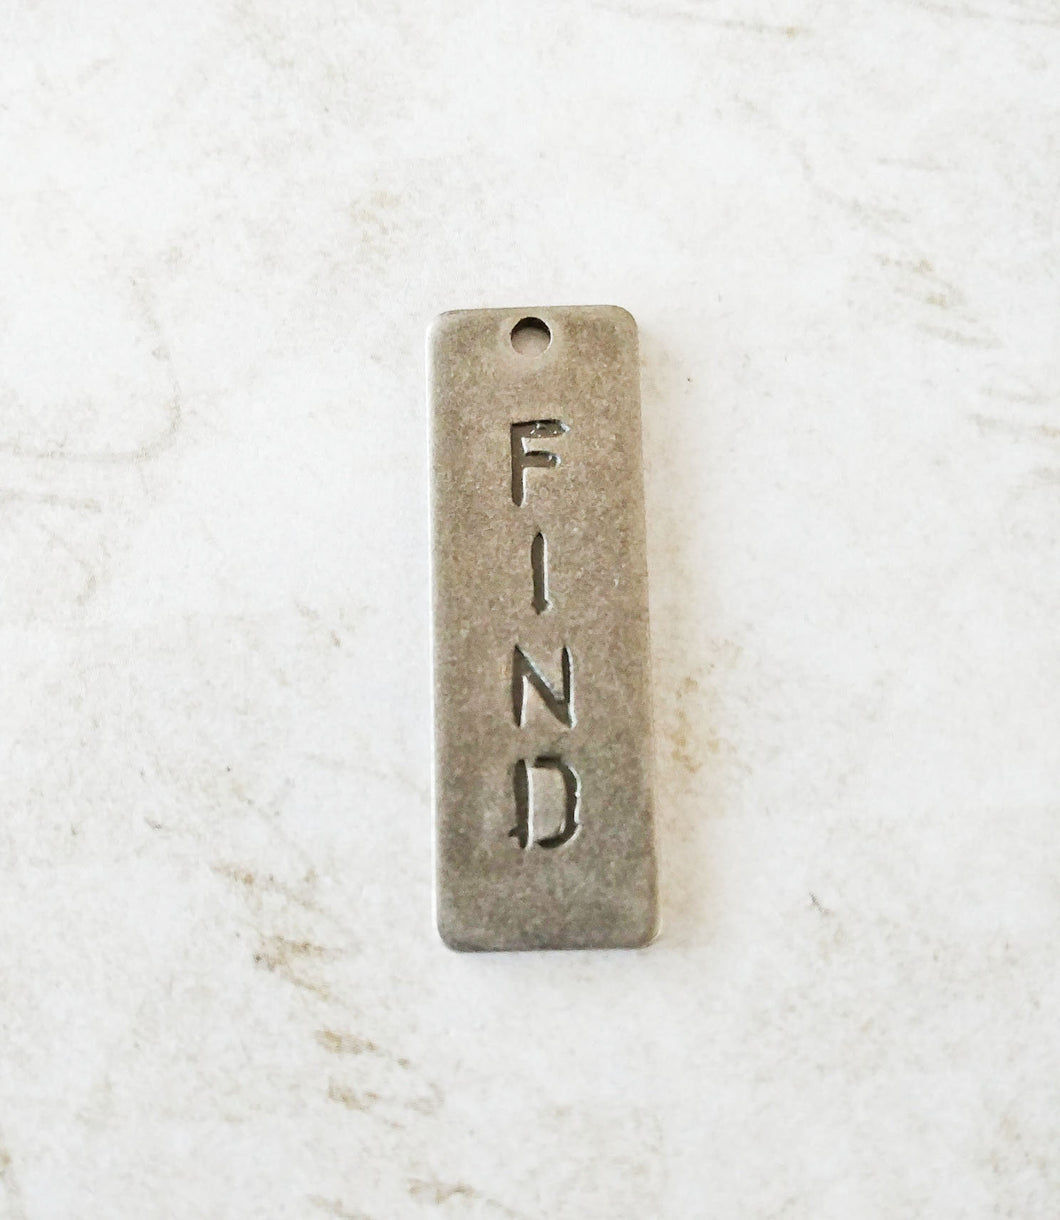 Word Charm Find Charm Silver Word Charm Inspirational Charm Silver Pendant Rectangle Word Charm Find Pendant